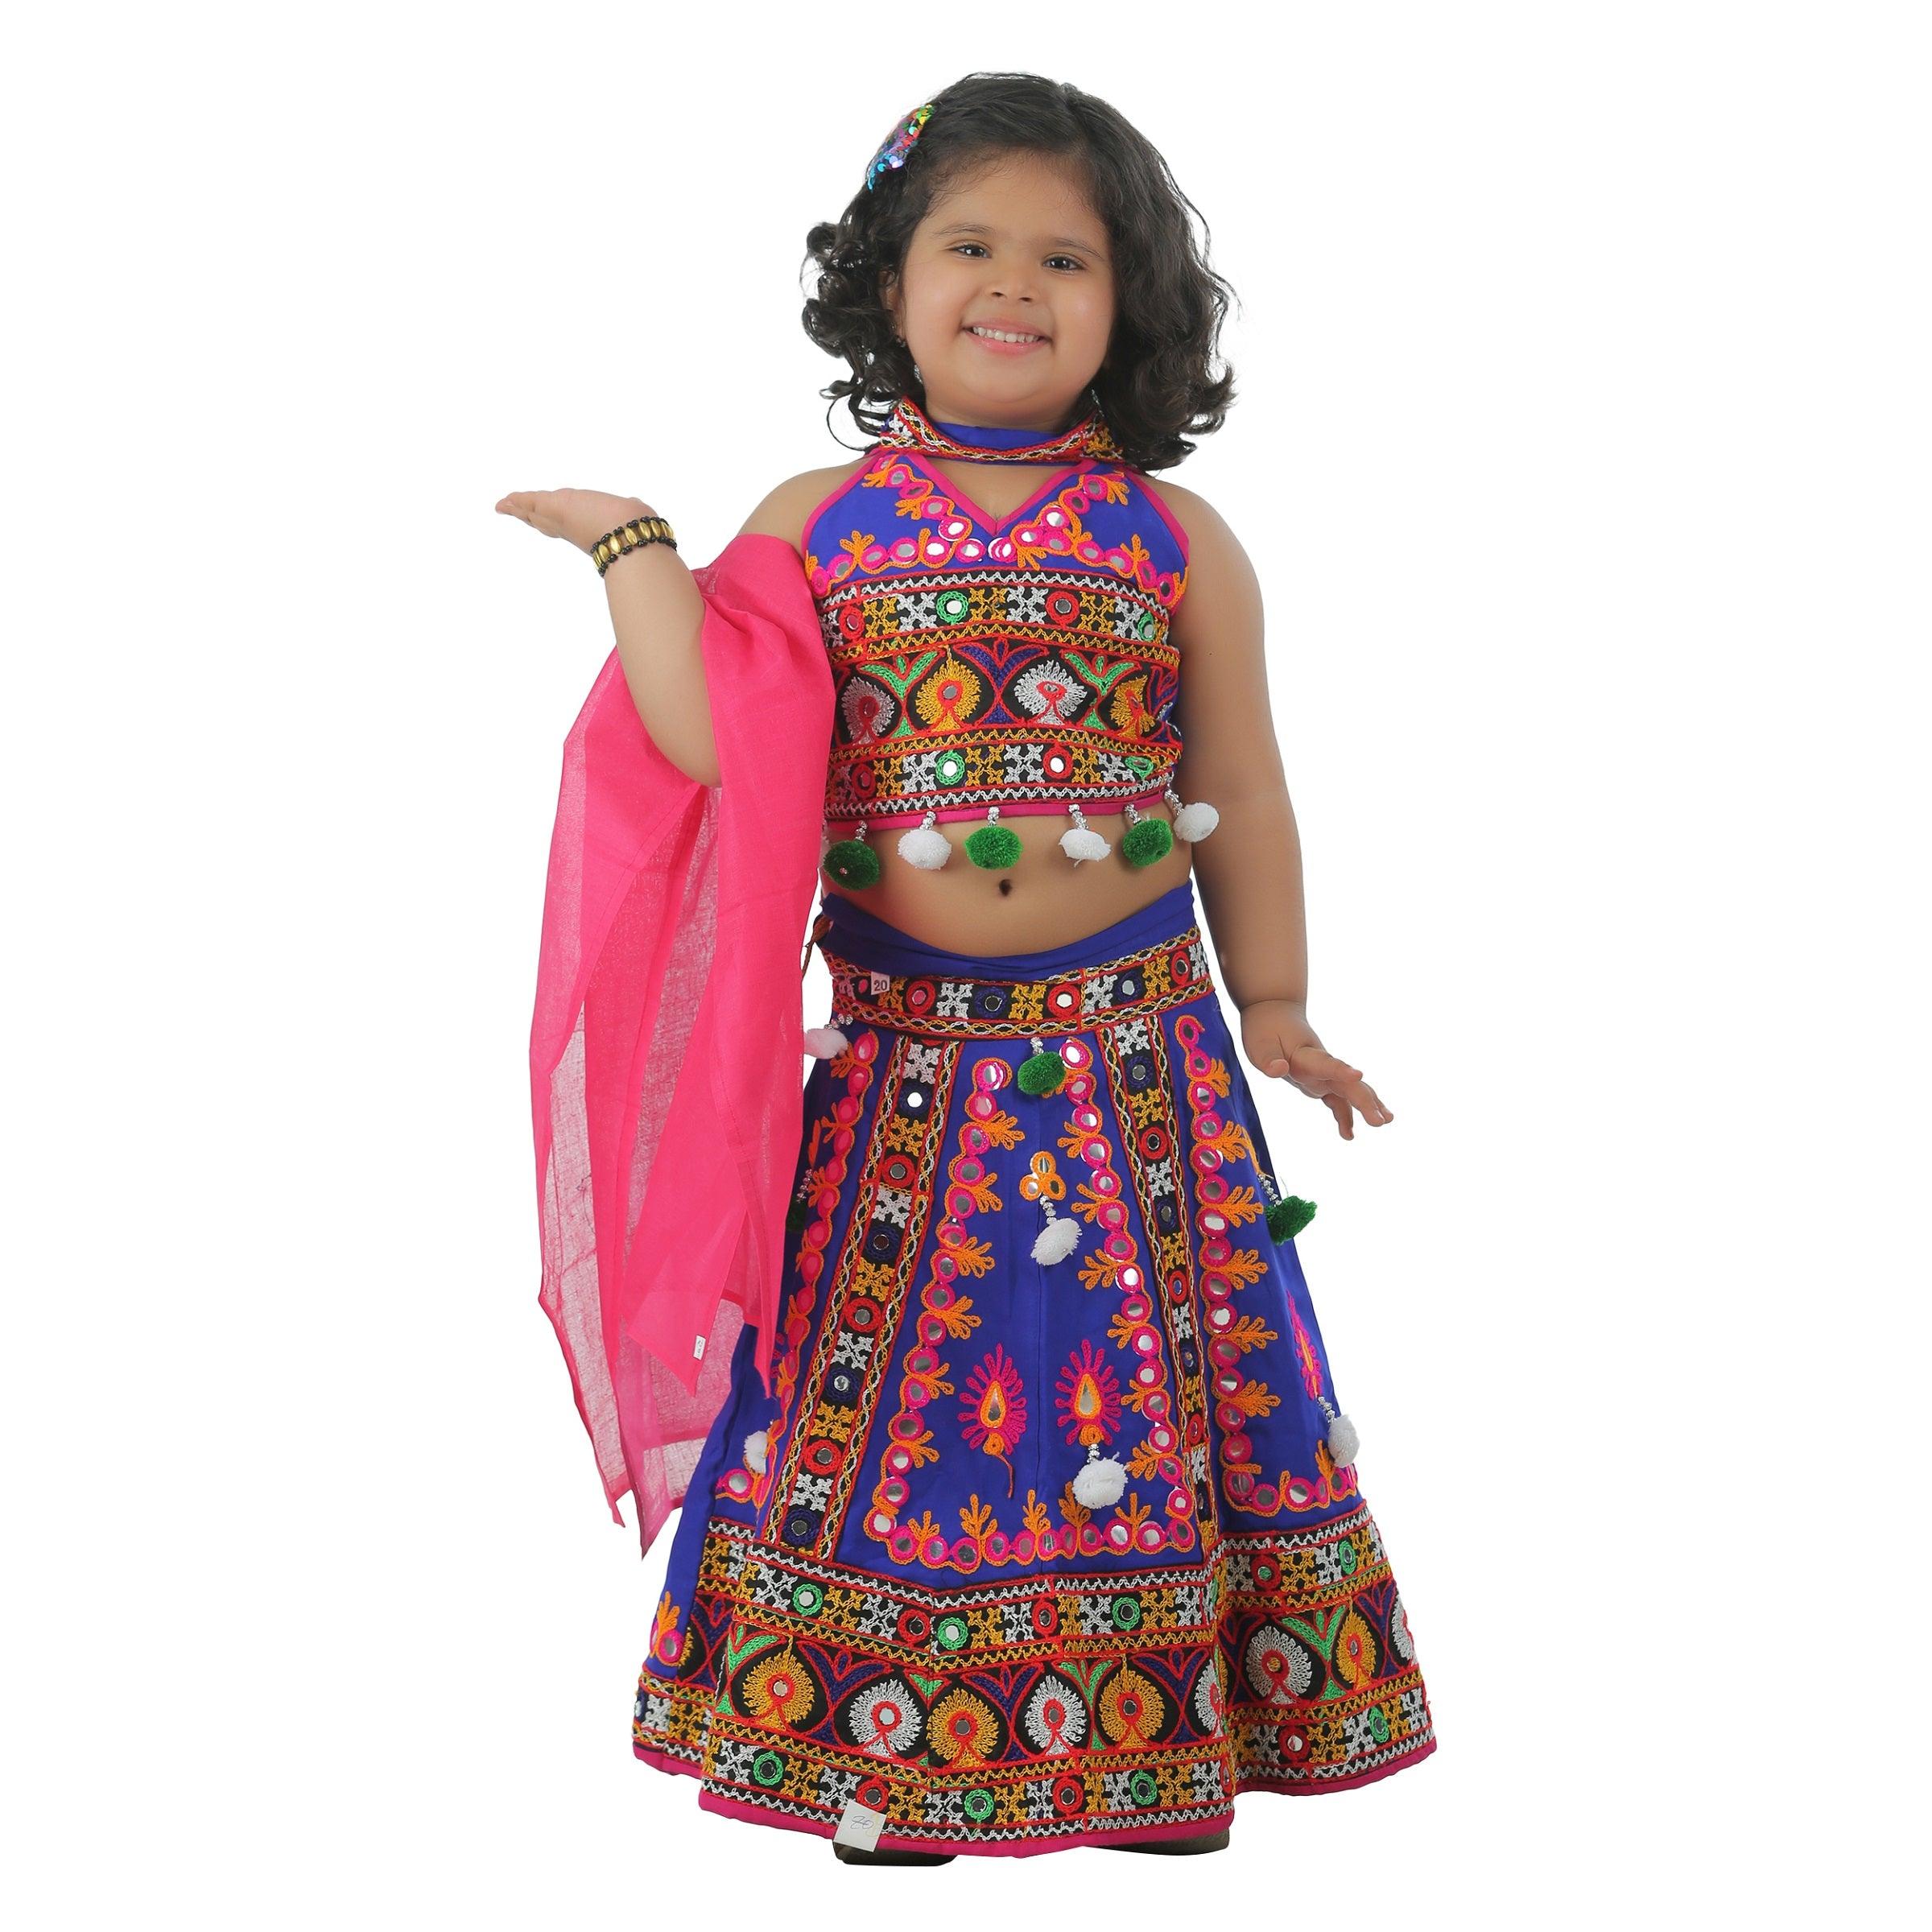 Indian Wedding Fashion Kids Outfits in UK, Australia and USA